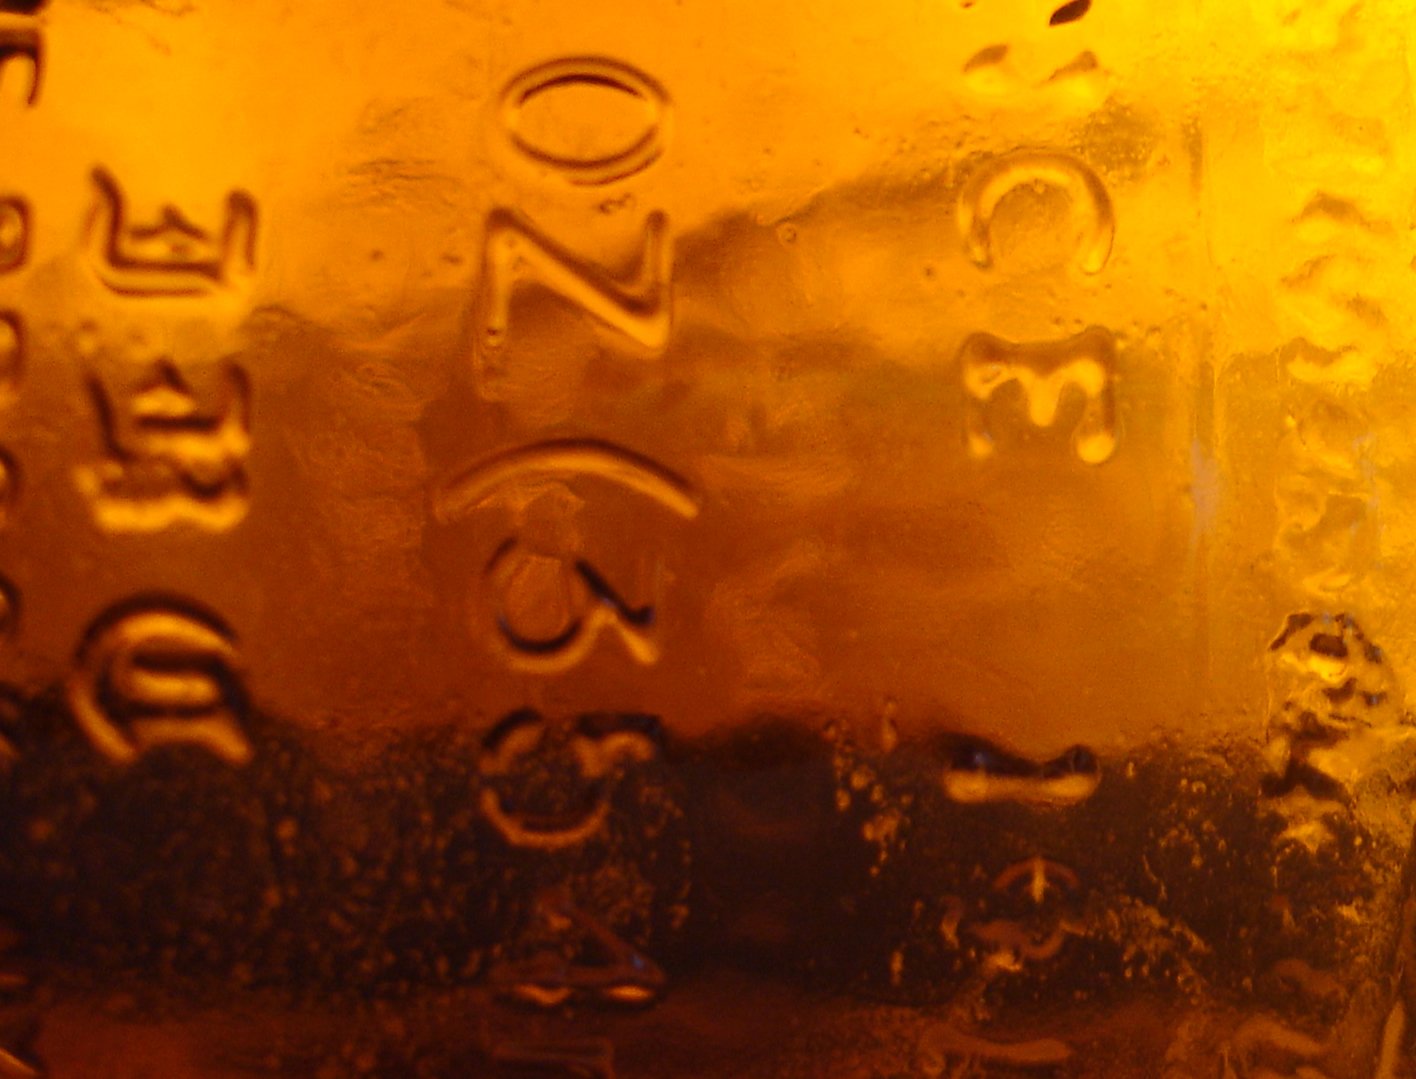 close up of glass with the word crazy written on it